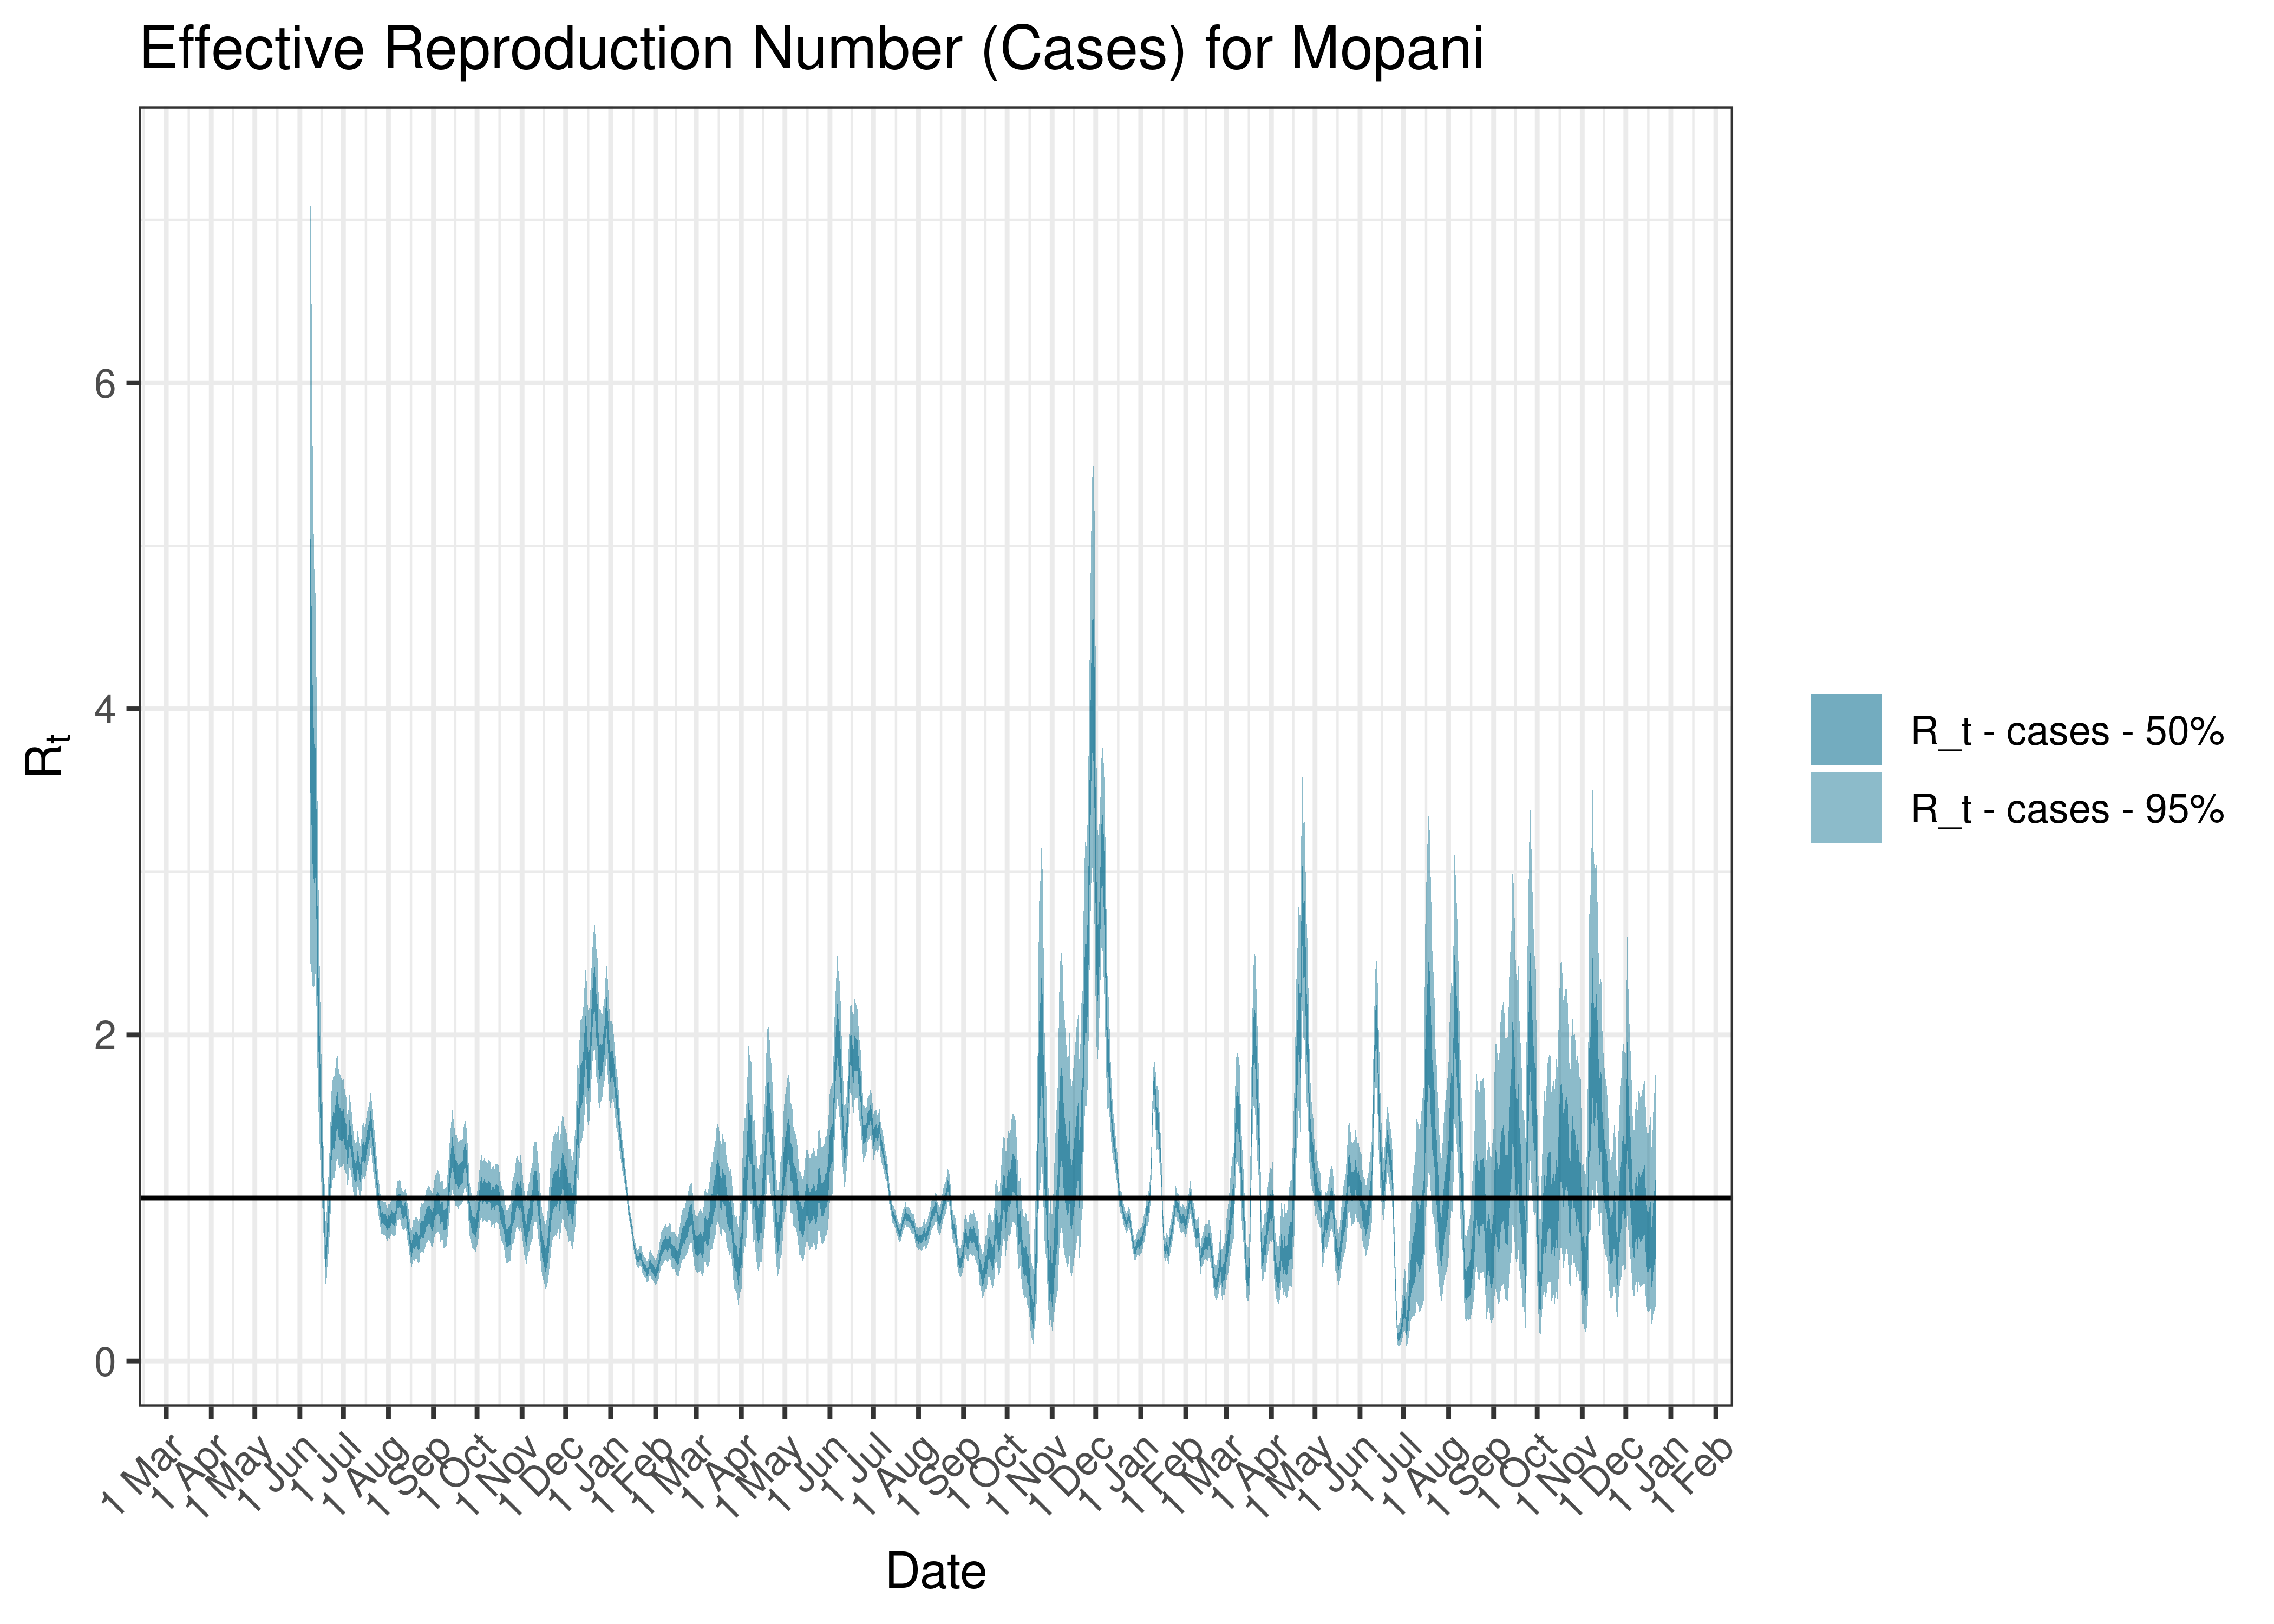 Estimated Effective Reproduction Number Based on Cases for Mopani since 1 April 2020